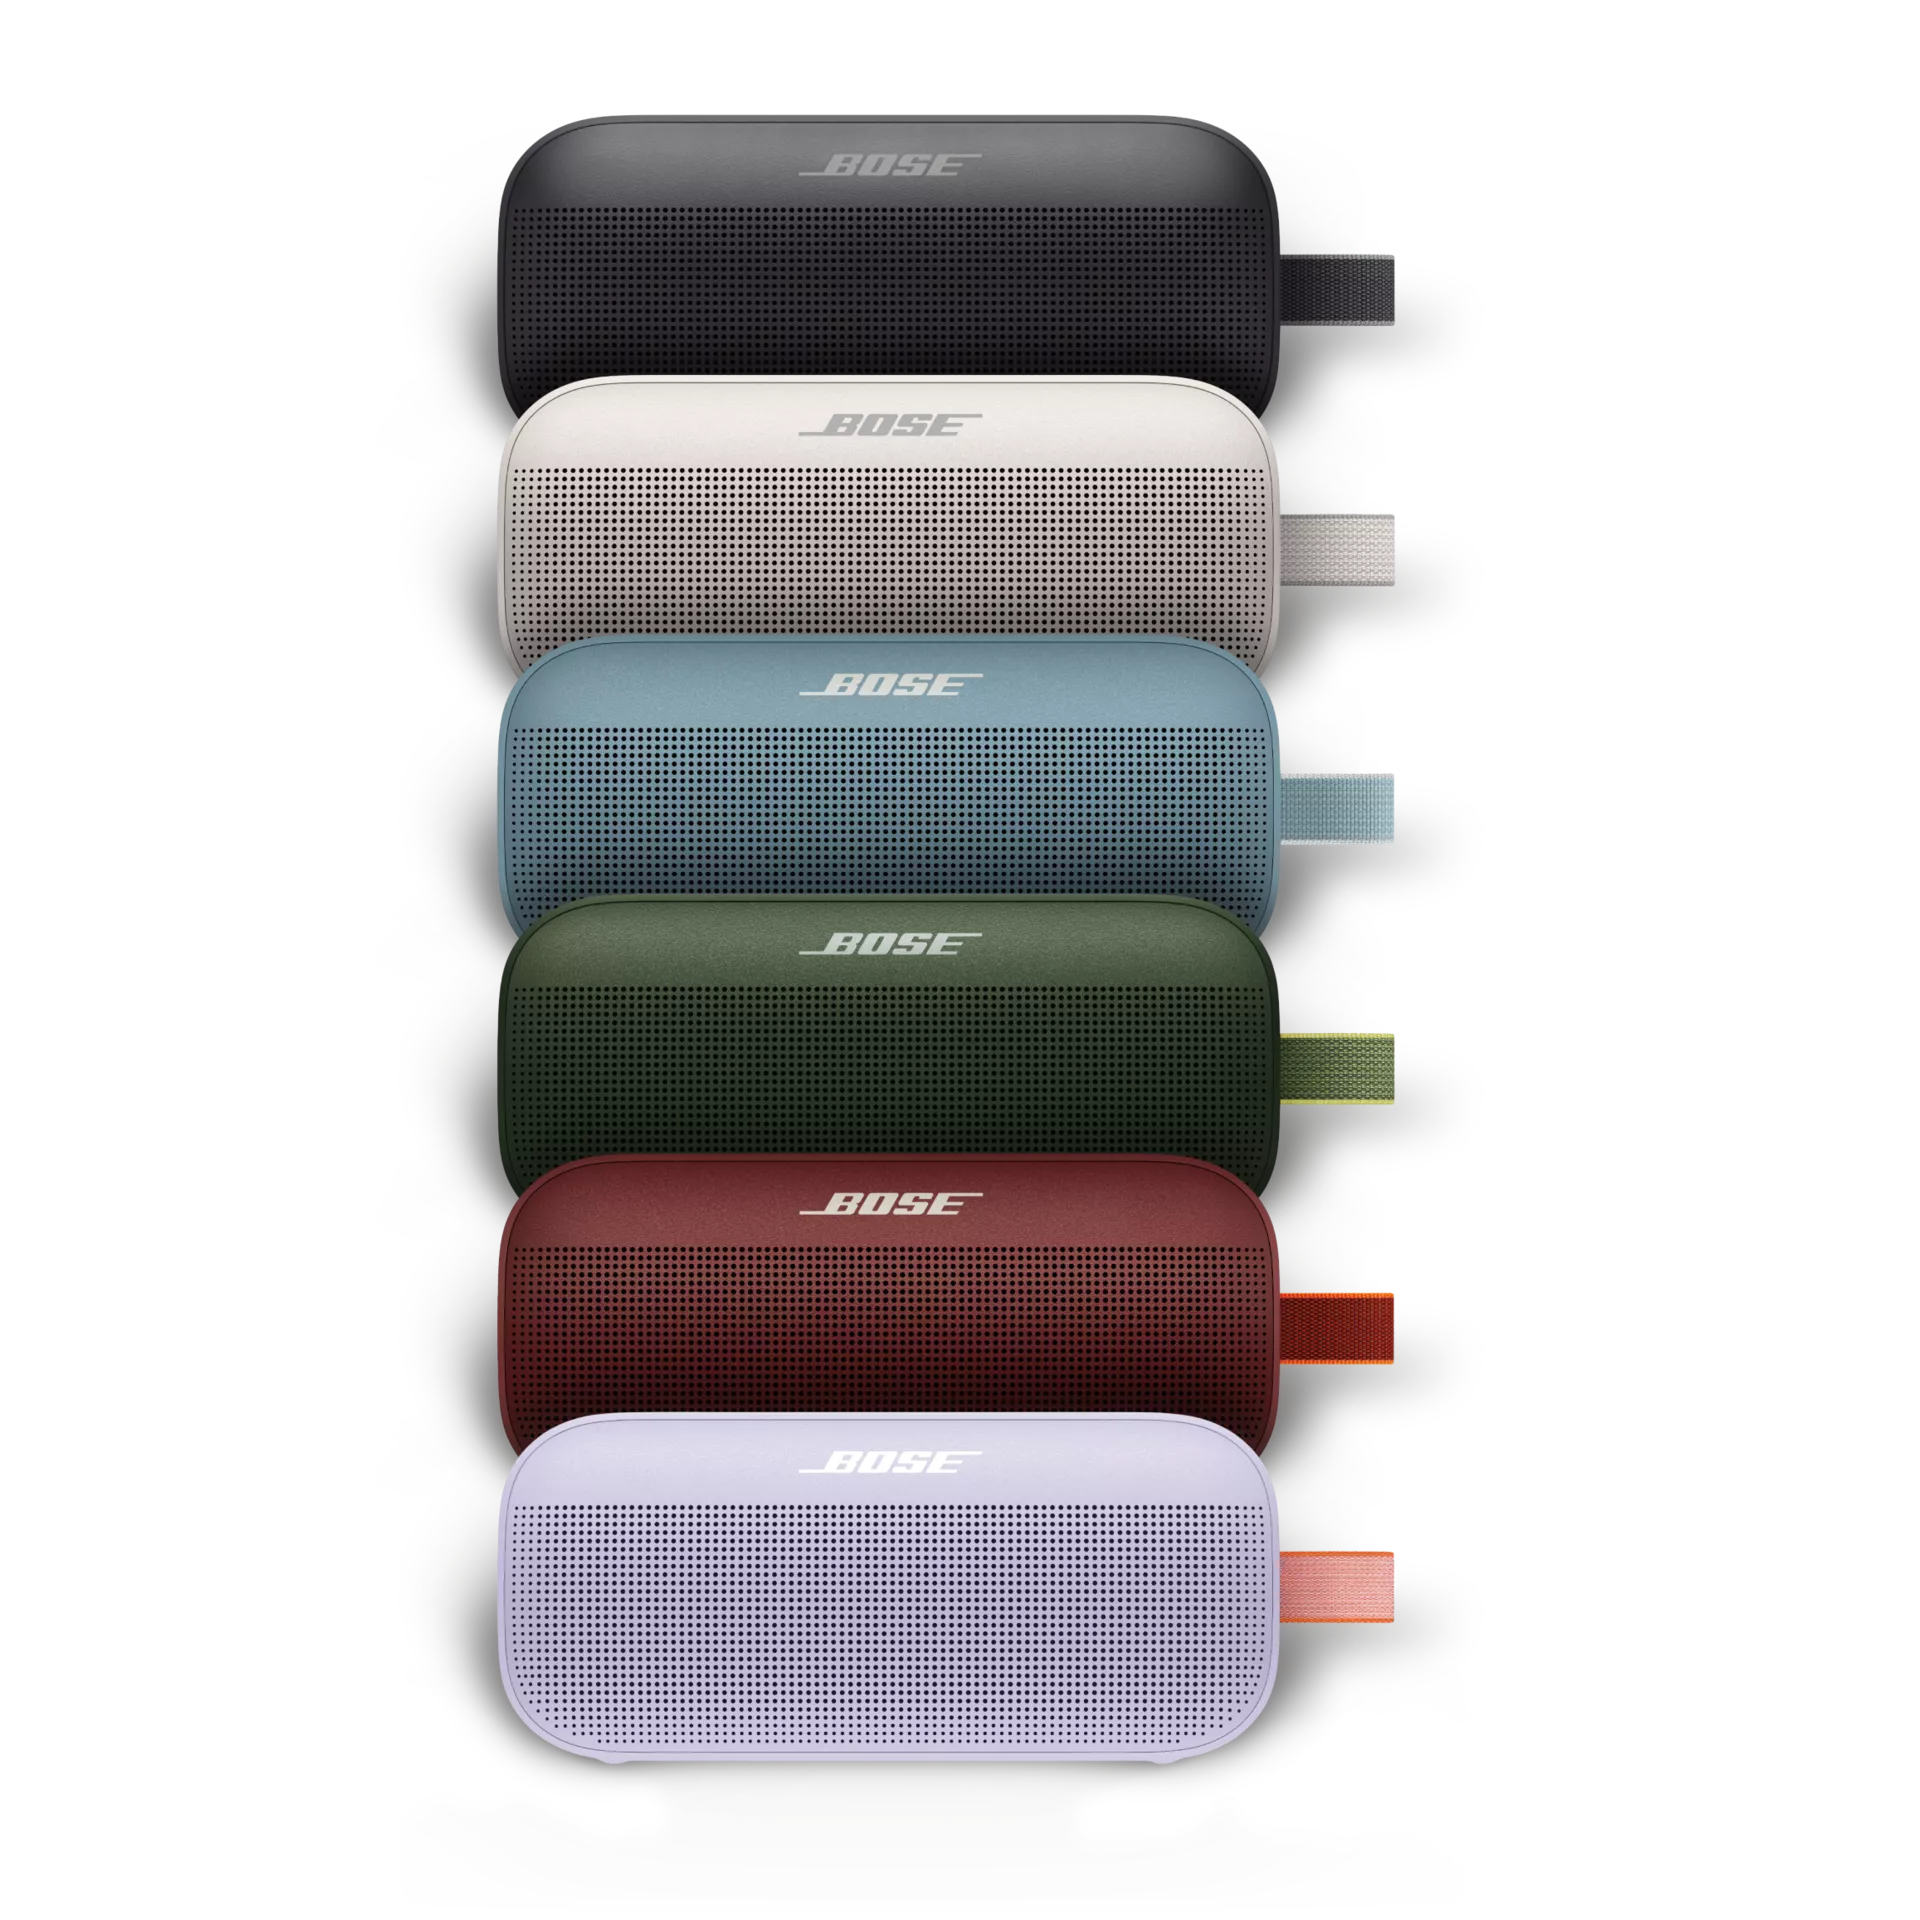 SoundLink Flex Bluetooth Speakers shown in Black, White Smoke, Stone Blue, Cypress Green, Carmine Red, and Chilled Lilac